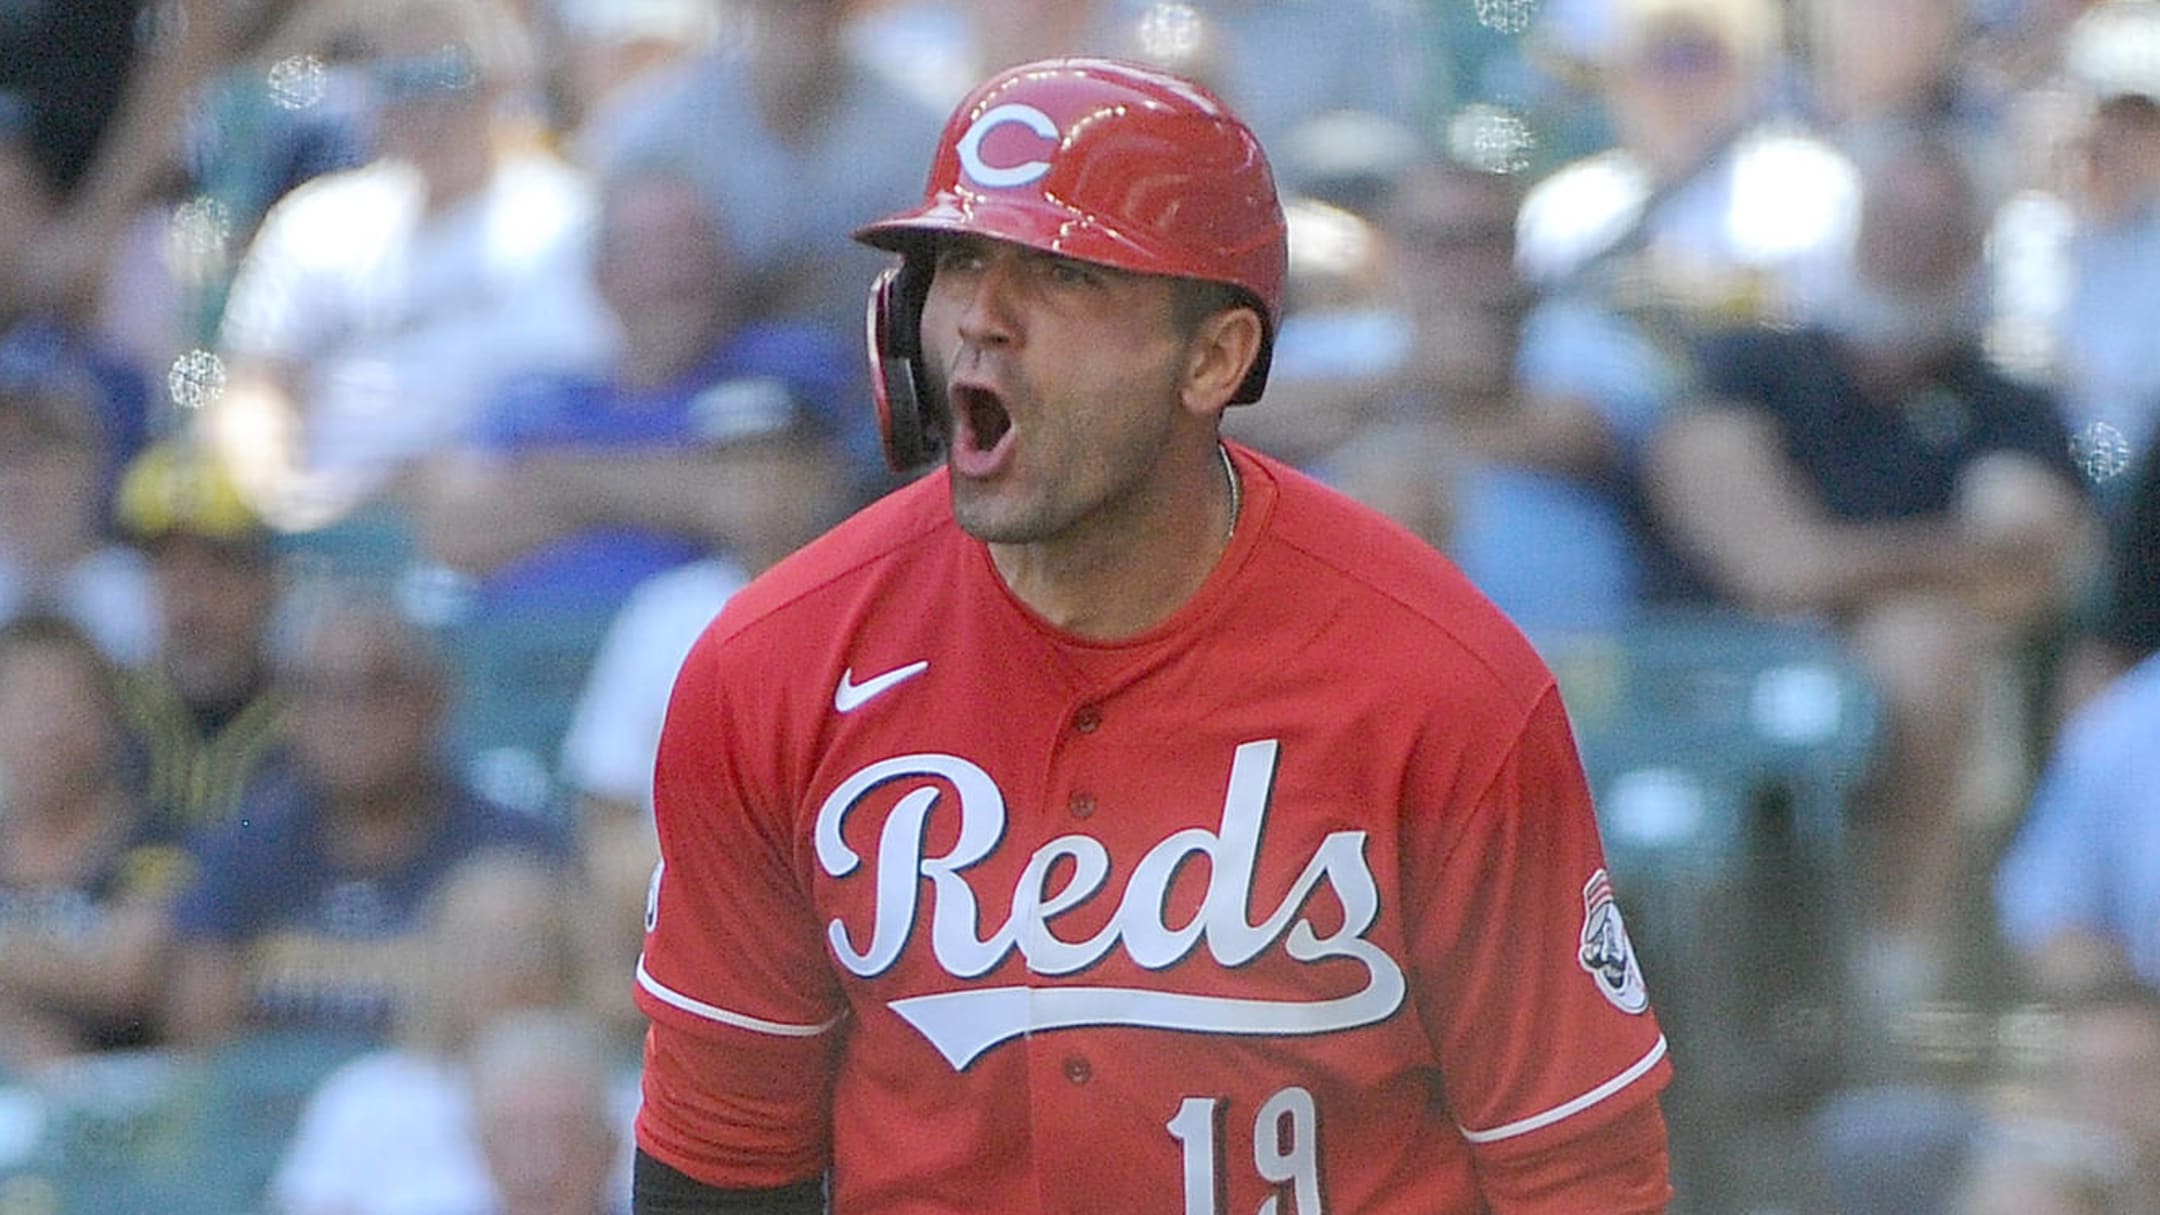 Joey Votto embarrassed by comments, came from 'place of jealousy